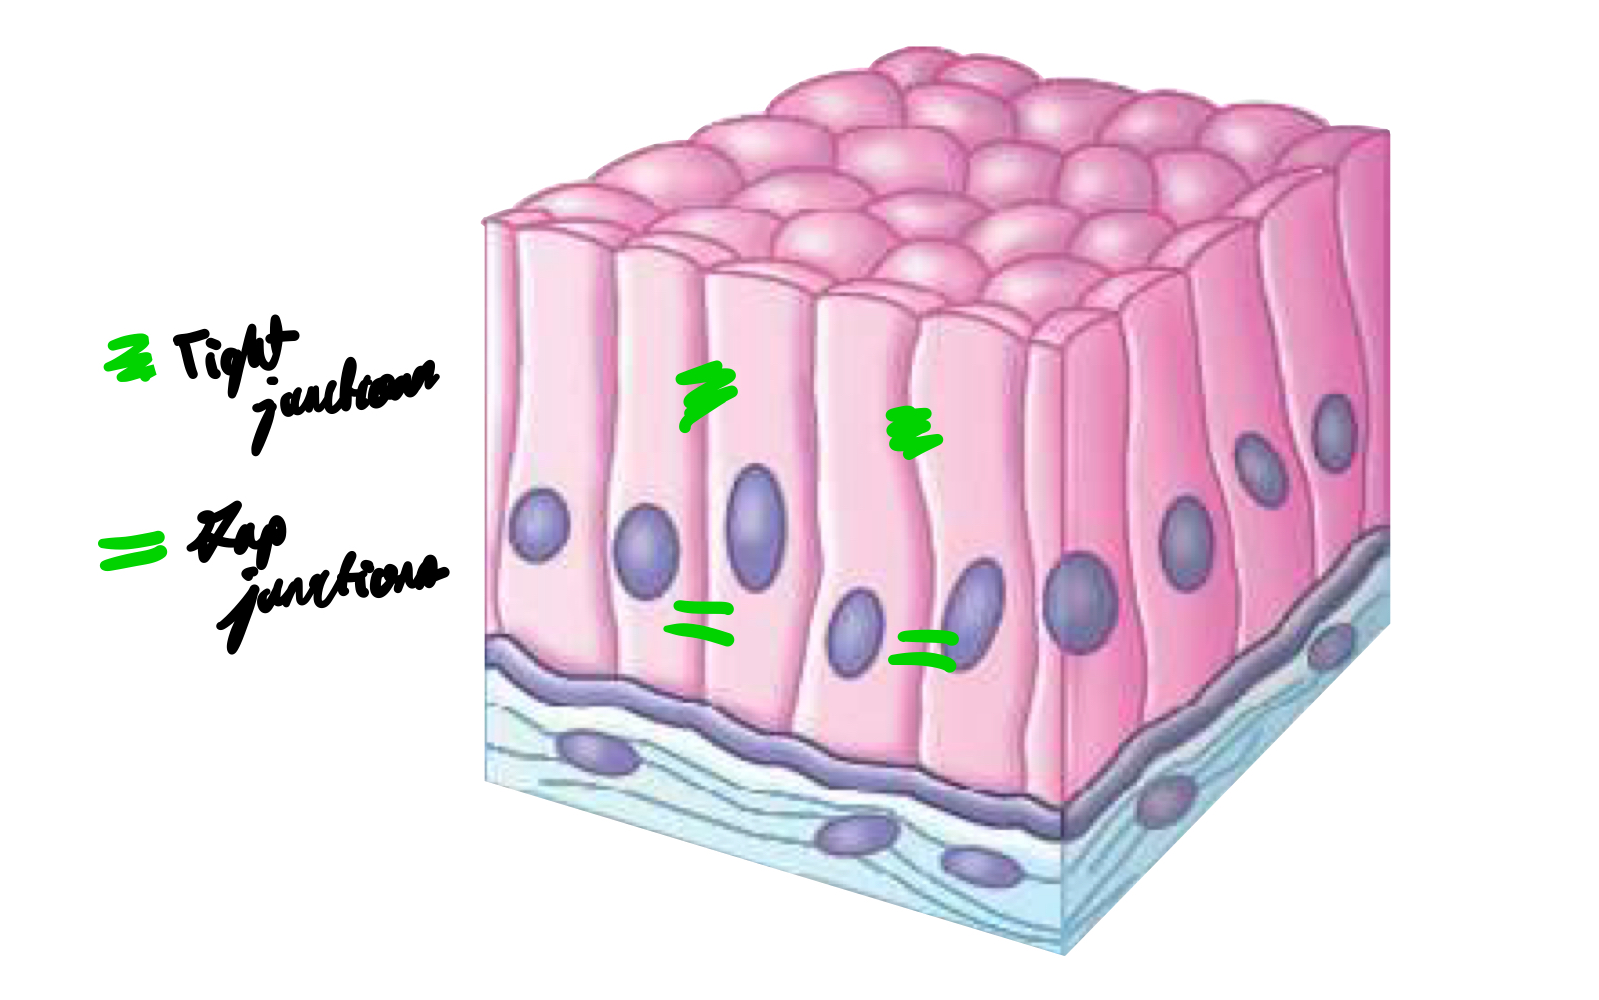 <ul><li><p>Gap junctions, which are permeable structures made of protein that allow direct communication and passage of small molecules between adjacent cells.</p></li><li><p>Tight junctions, which are impermeable structures made of protein forming a barrier between adjacent cells, preventing passage of molecules to maintain tissue integrity.</p></li></ul>